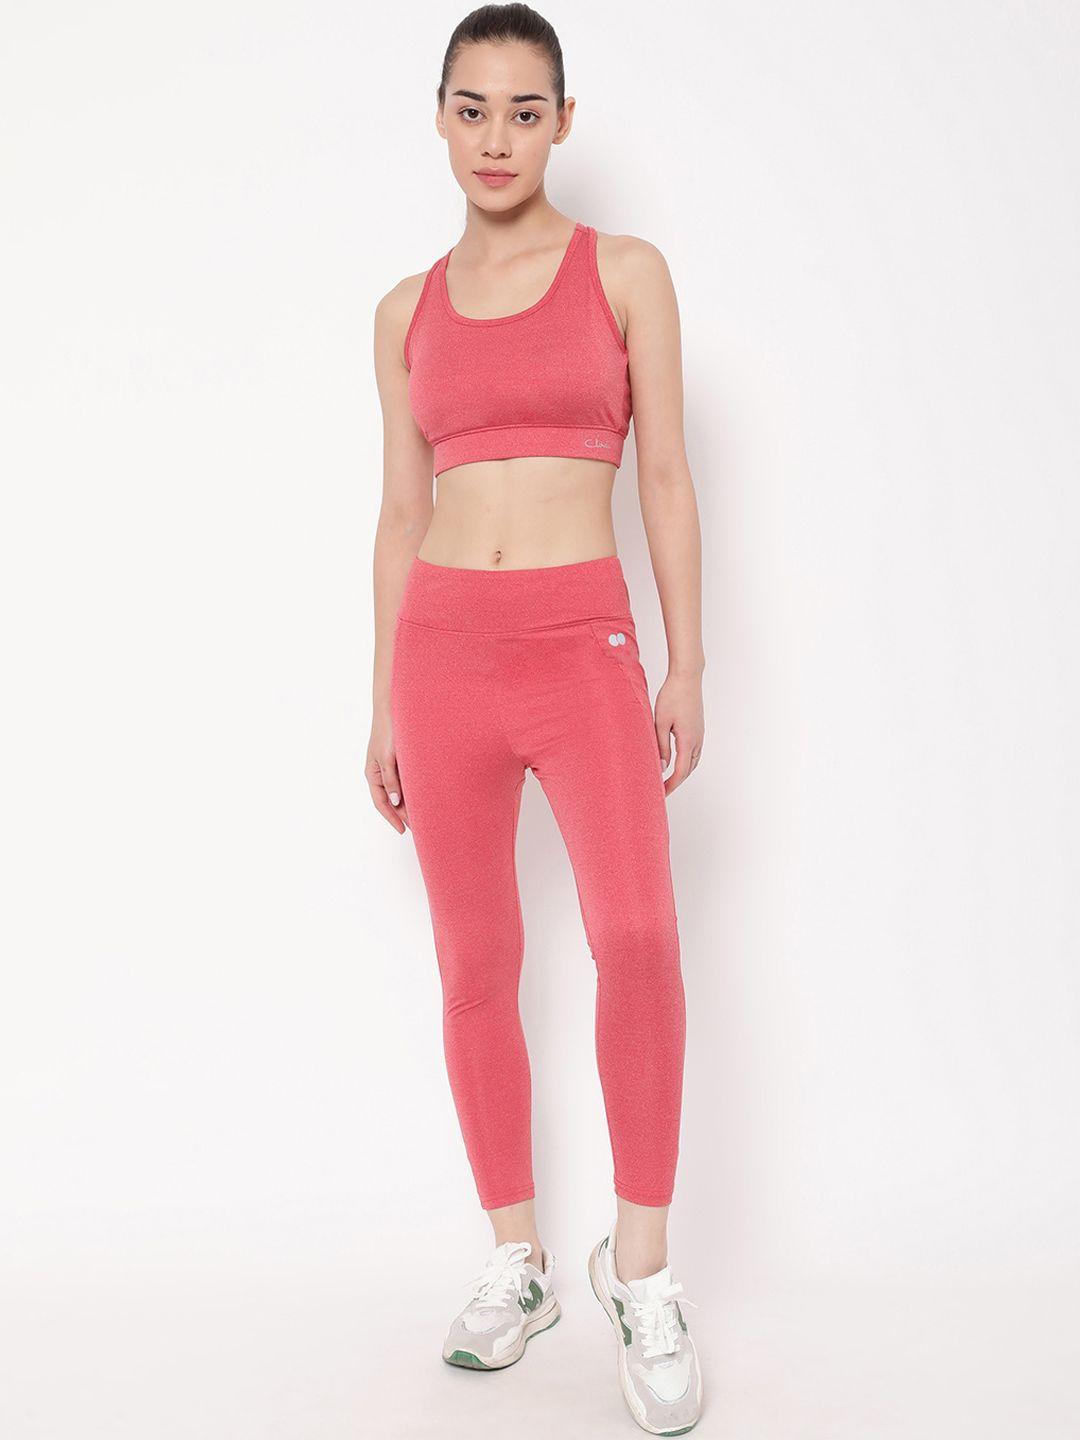 clovia red padded sports bra & high-rise tights 4-way stretch tracksuits